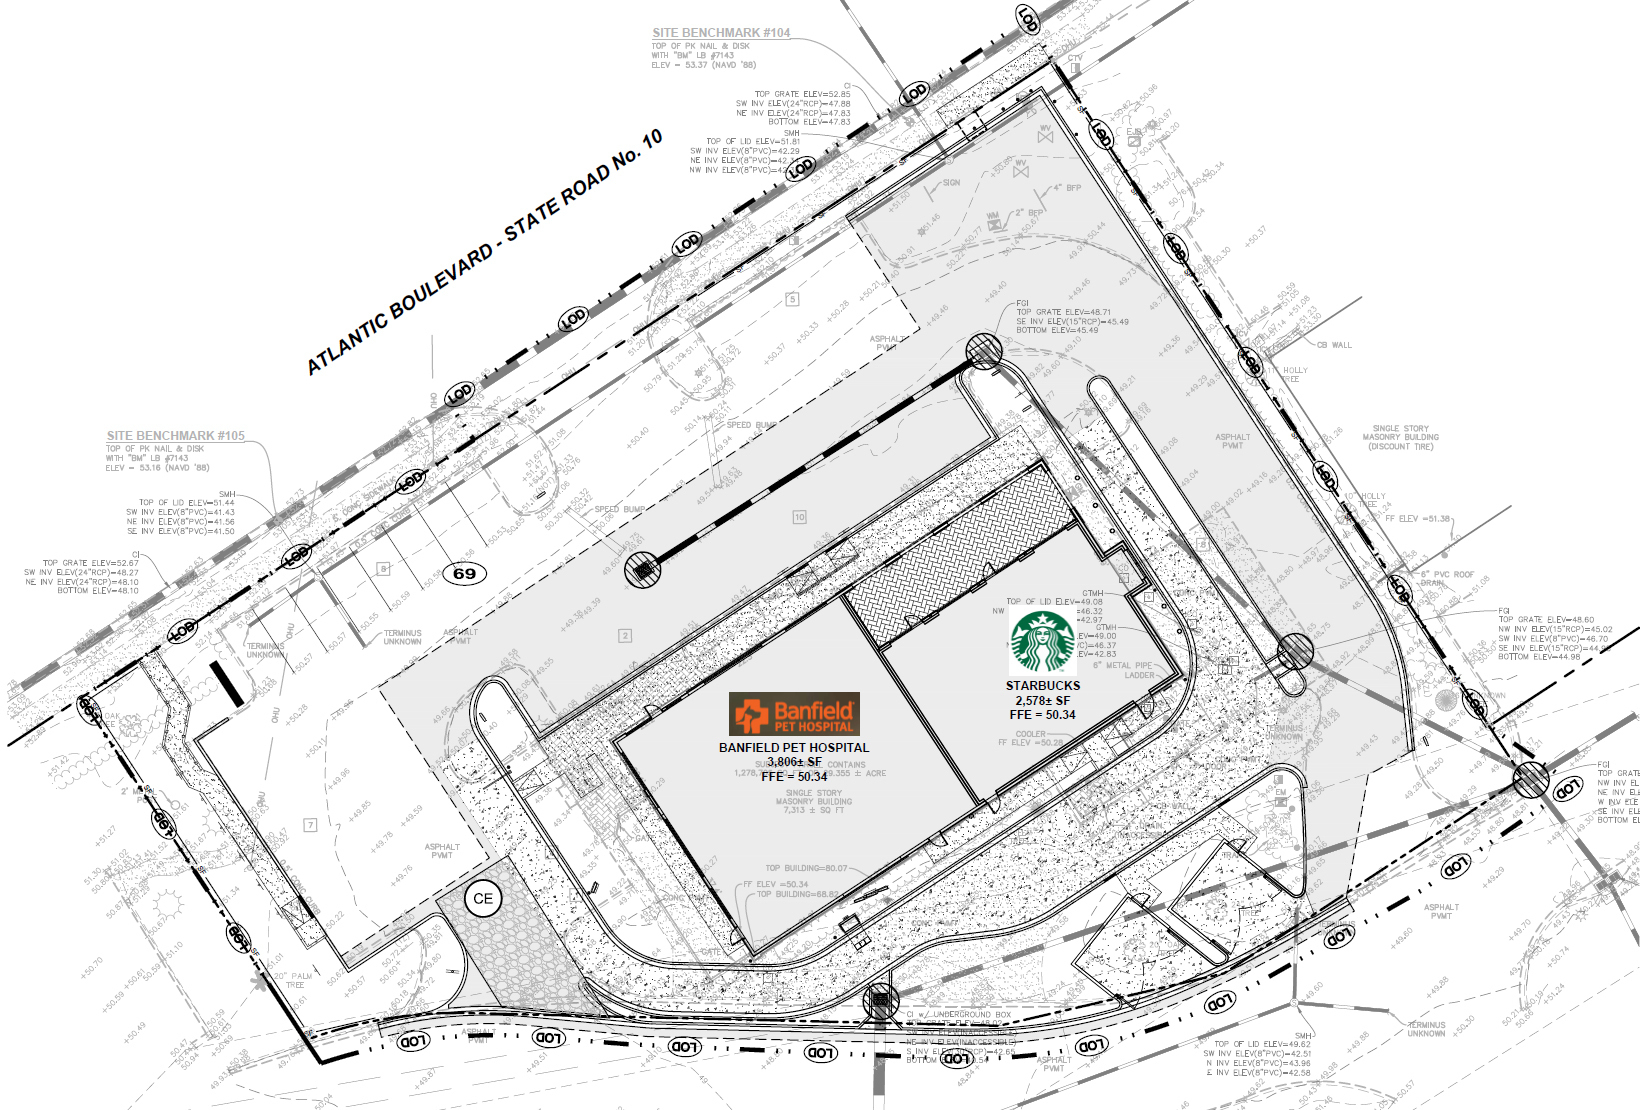 The site plan for the divided former TGI Fridays.